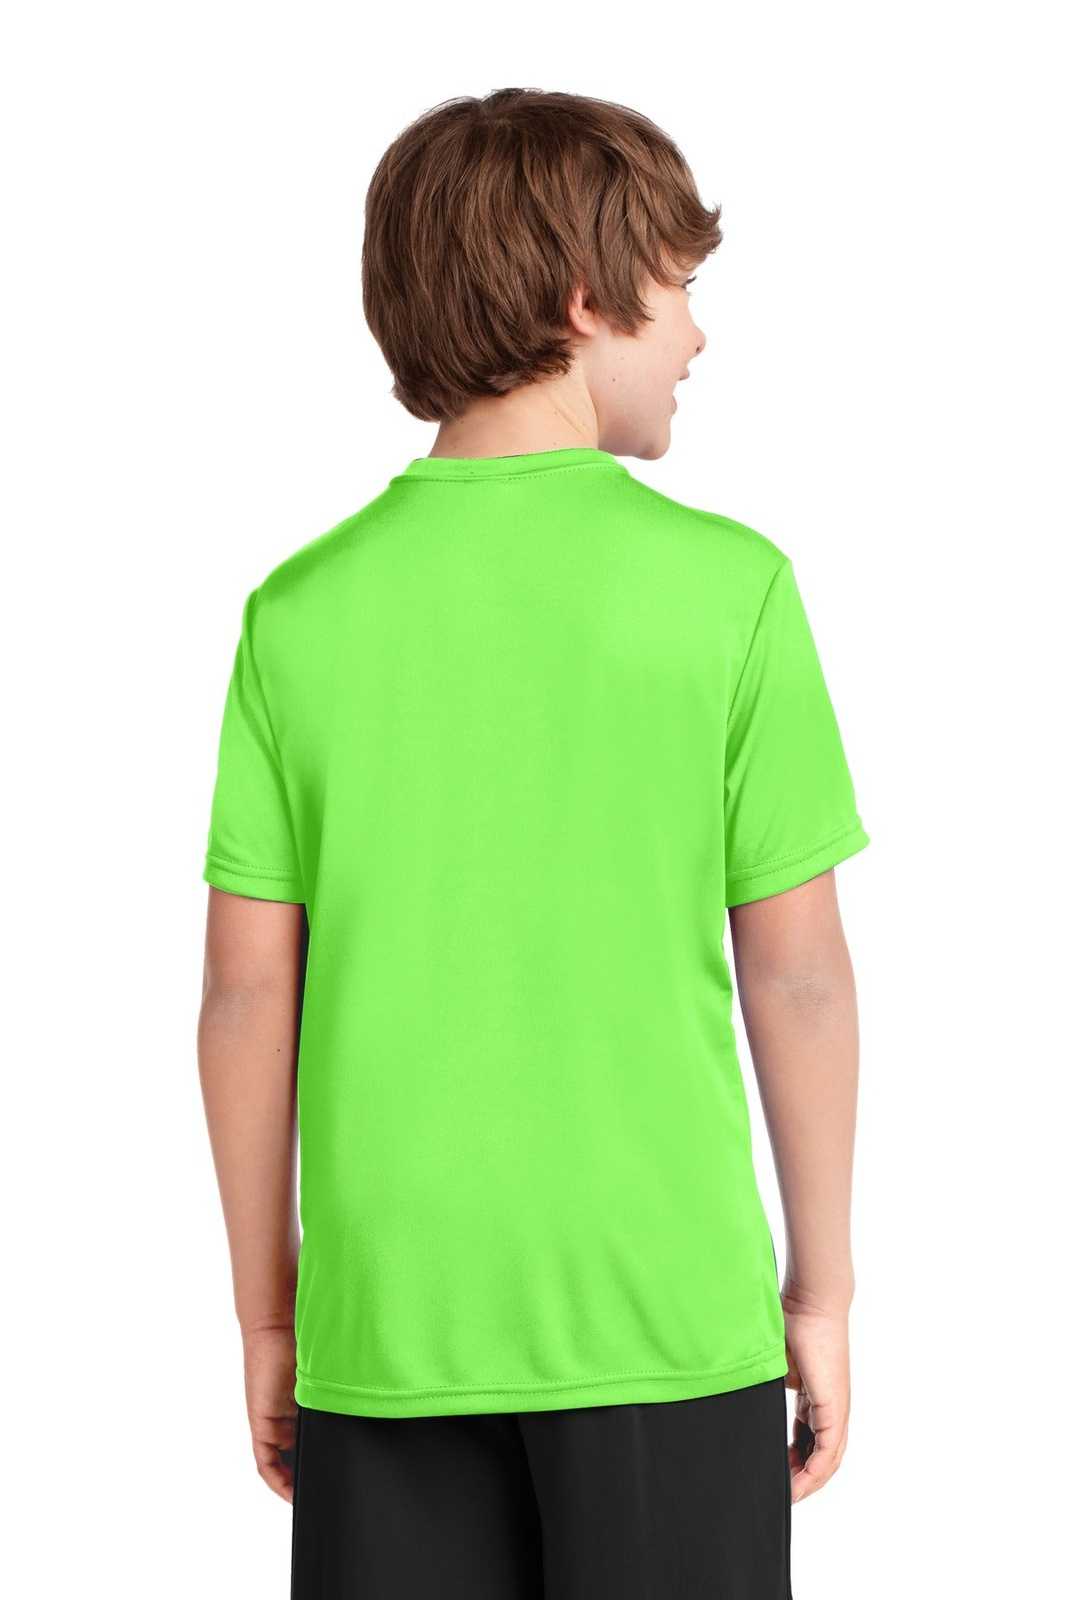 Port &amp; Company PC380Y Youth Performance Tee - Neon Green - HIT a Double - 2